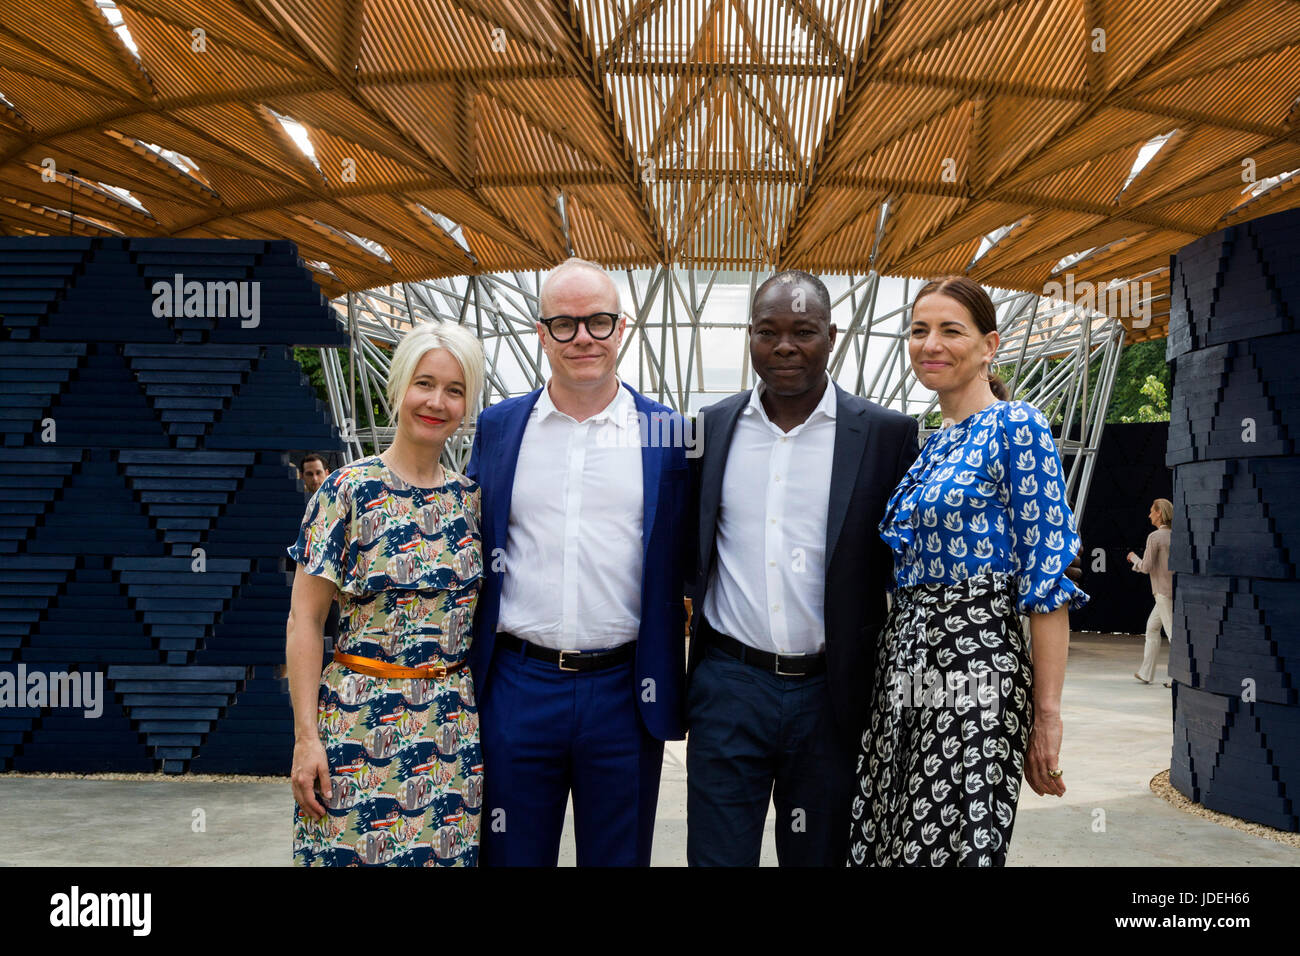 London, UK. 20 June 2017. L-R: Justine Simons, Deputy Mayor, Deputy Mayor, Culture and the Creative Industries, Hans-Ulrich Obrist, Artistic Director, Serpentine Galleries, Francis Kere, Architect, and Yana Peel, CEO, Serpentine Galleries. Diebedo Francis Kere, the award-winning architect from Gando, Burkina Faso, has designed the Serpentine Pavilion 2017, next to the Serpentine Gallery in Kensington Gardens. Kere leads the Berlin-based practice Kere Architecture. He is the 17th architect to accept the Serpentine Gallery's invitation to design a temporary Pavilion in its grounds. The Pavilion  Stock Photo